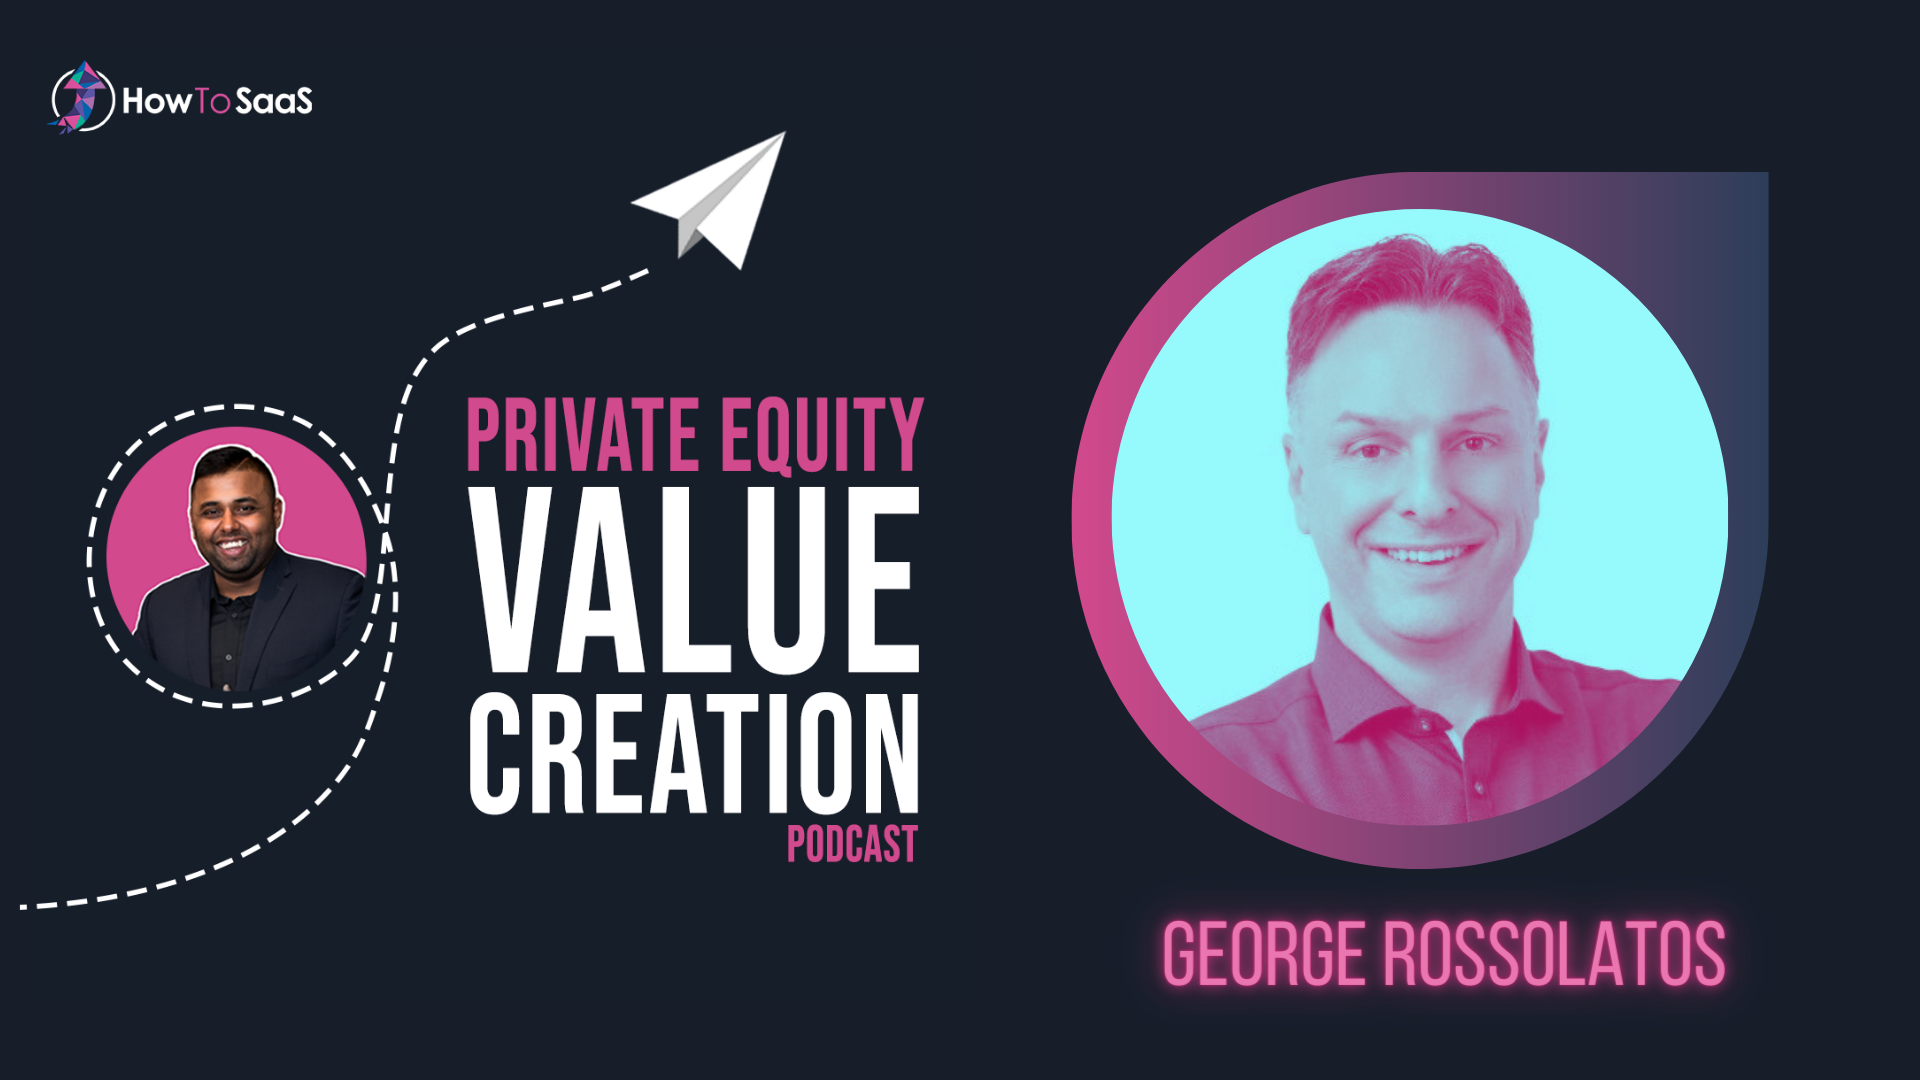 Private equity value creation podcast